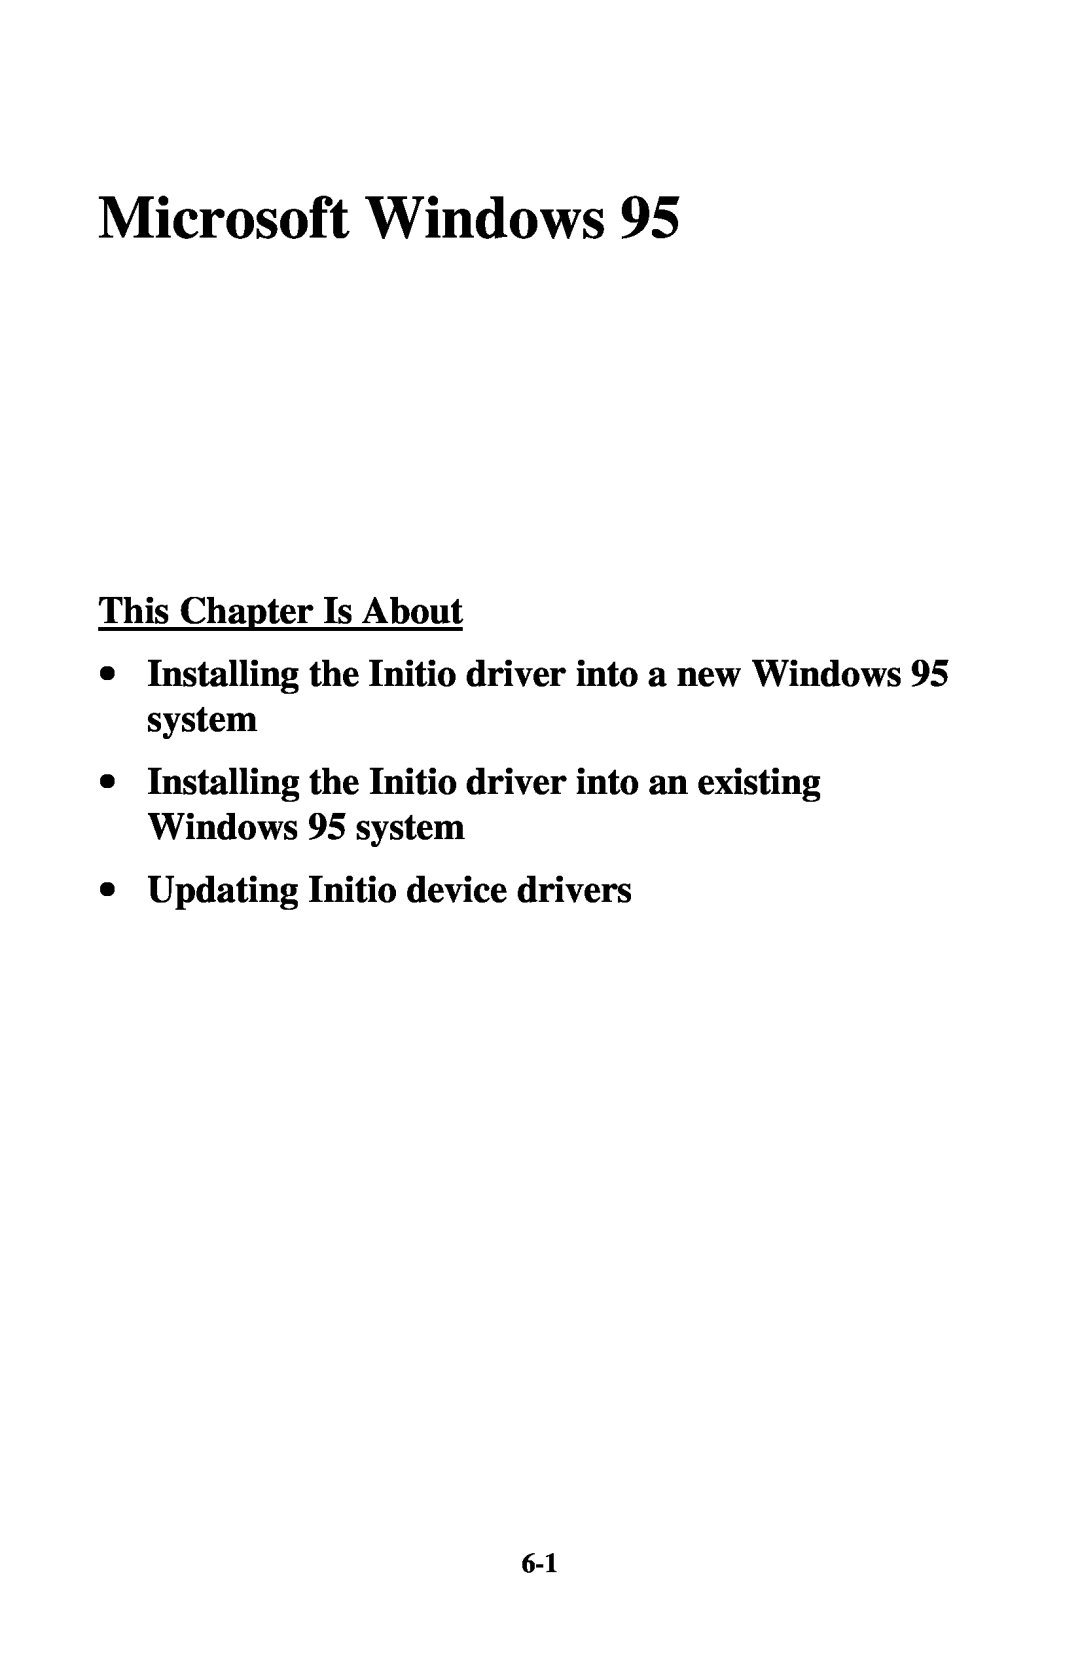 Initio INI-9100UW Microsoft Windows, ∙ Installing the Initio driver into a new Windows 95 system, This Chapter Is About 